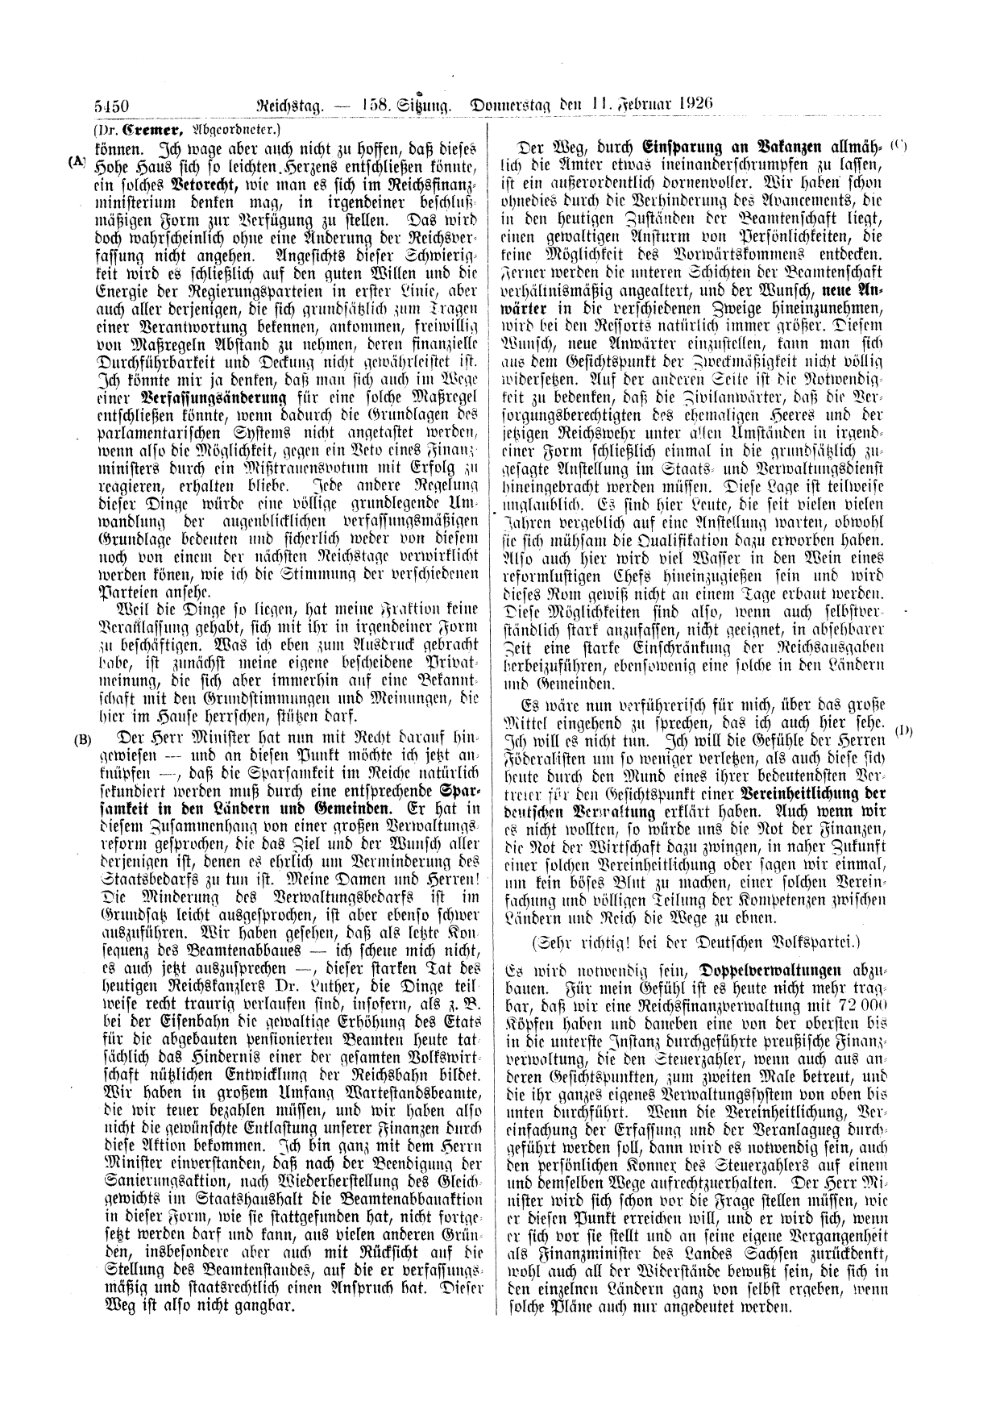 Scan of page 5450